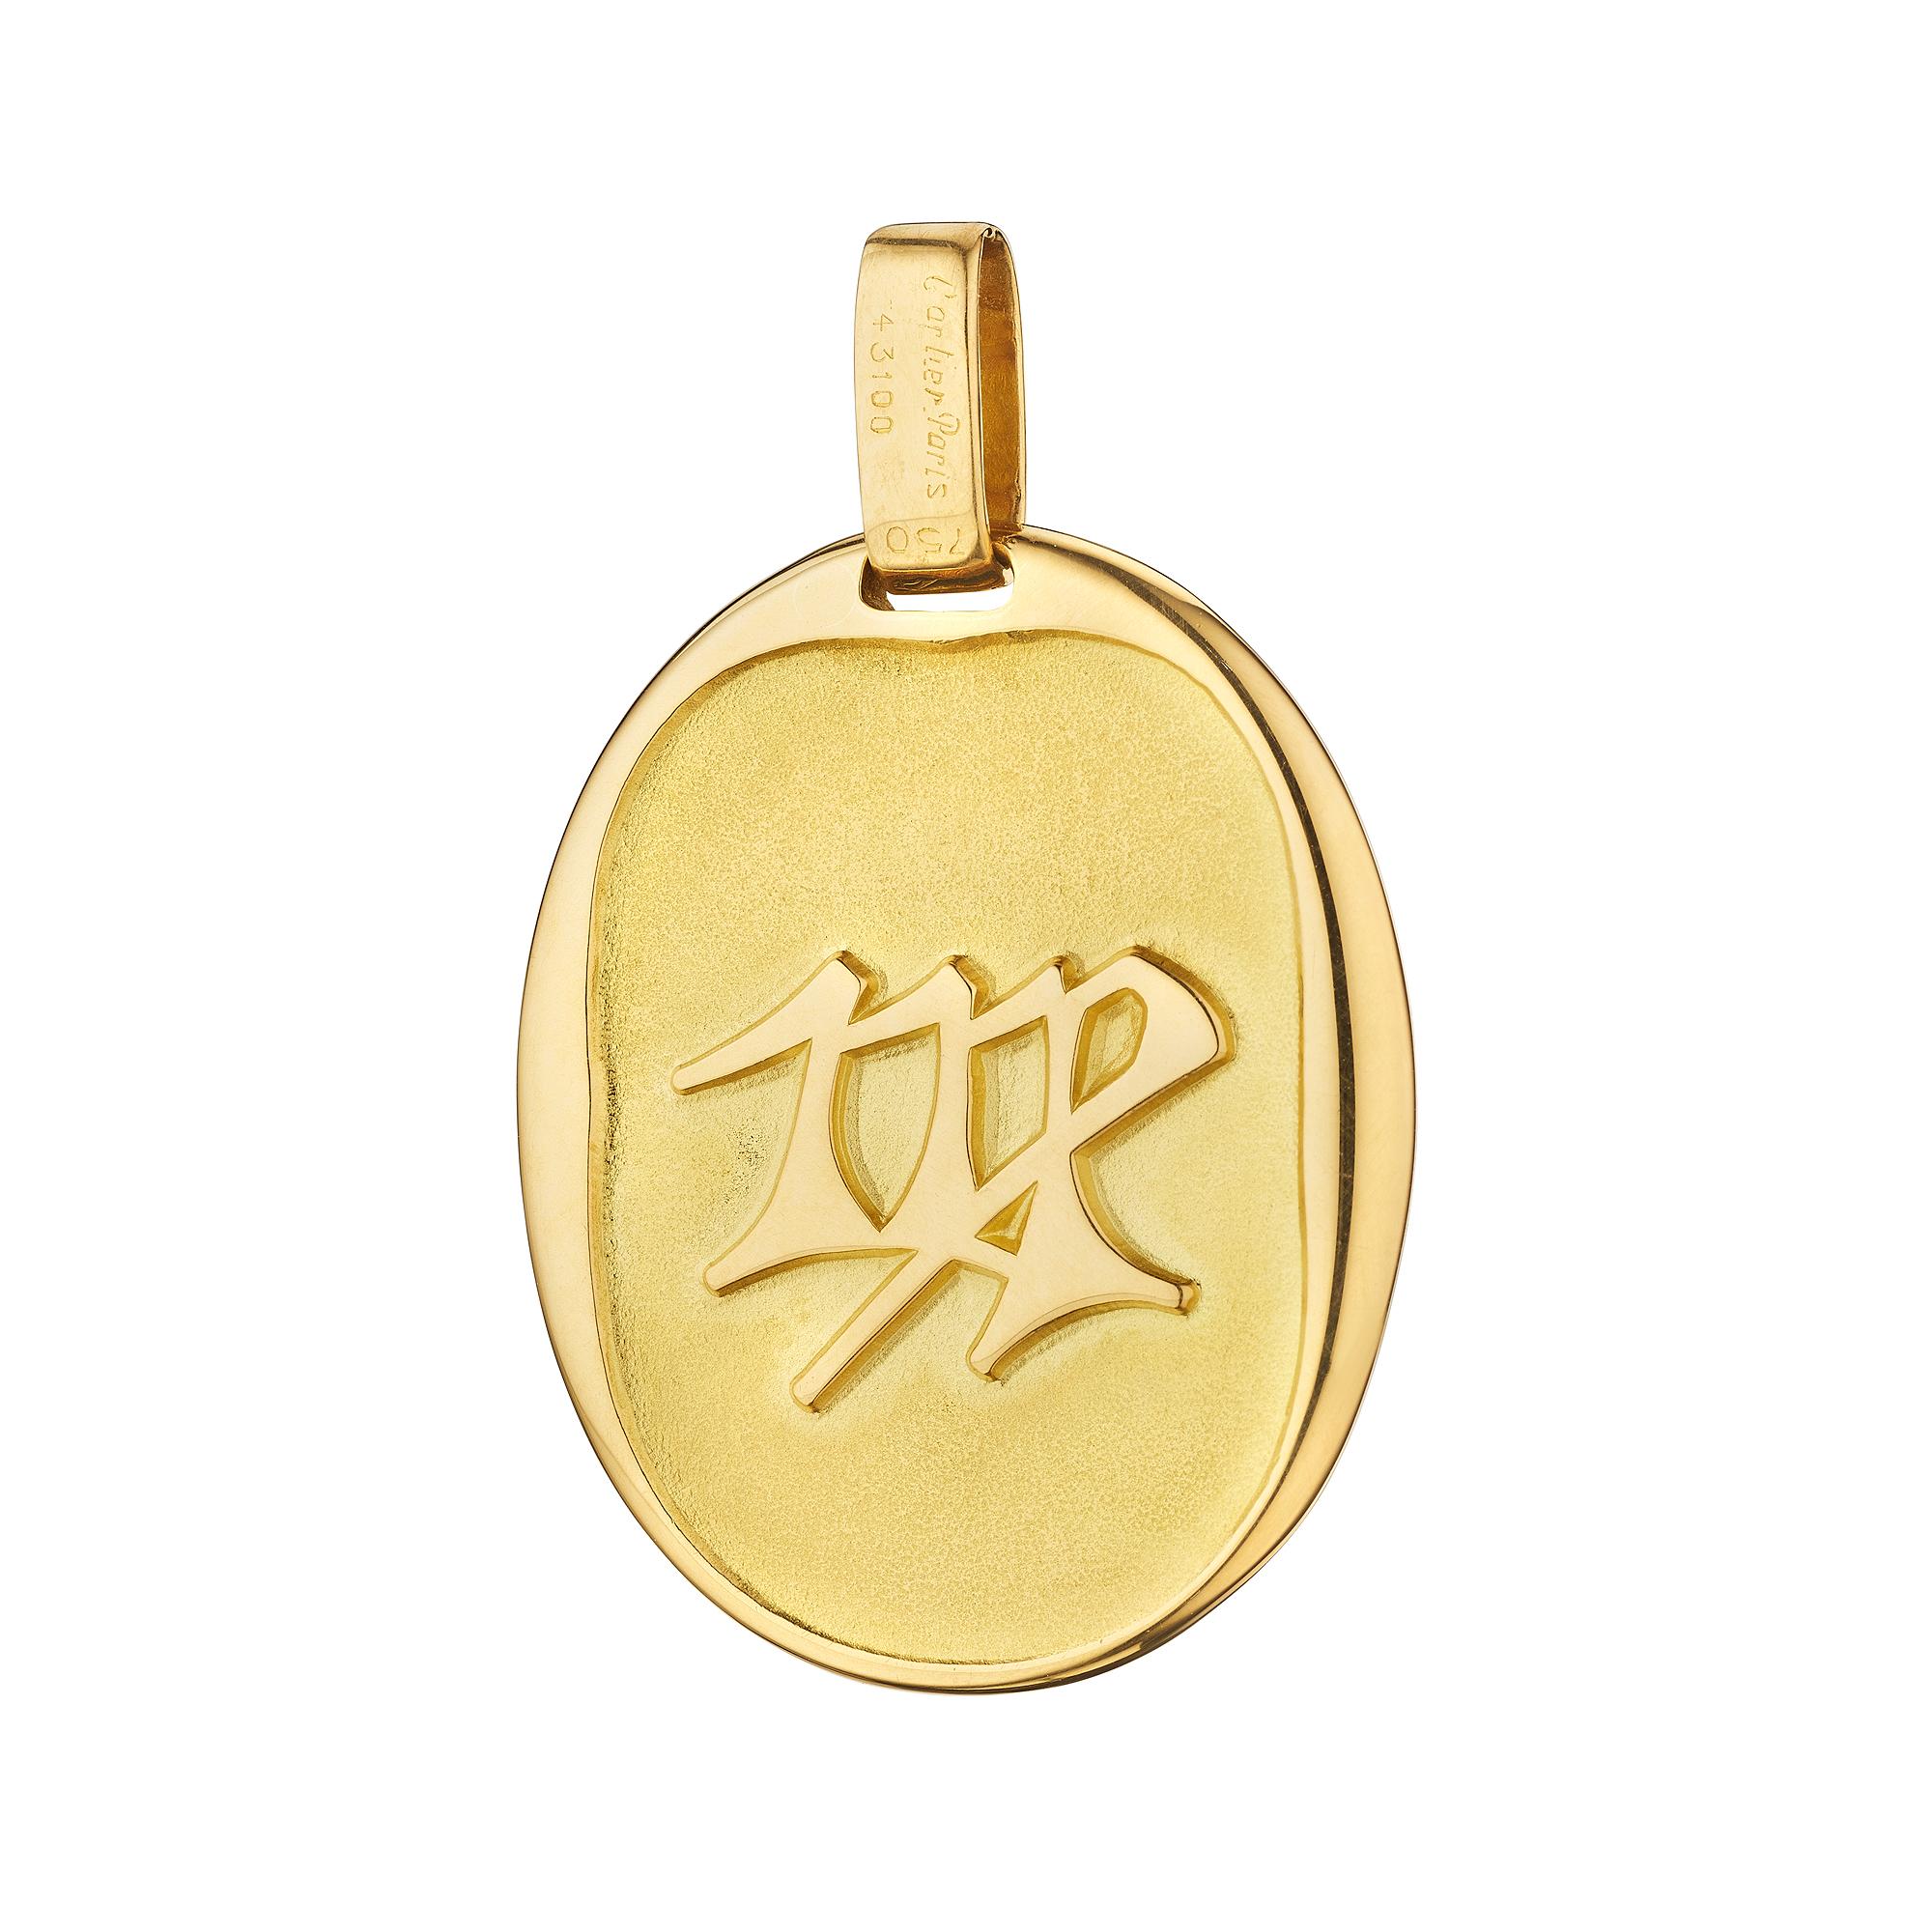 With the Virgo Zodiac sign of the harvest maiden engraved on the front and its numerical sign on the back, this Georges L'Enfant for Cartier Paris 18 karat yellow gold modernist oval disc pendant is destined for those with a love of the celestial. 